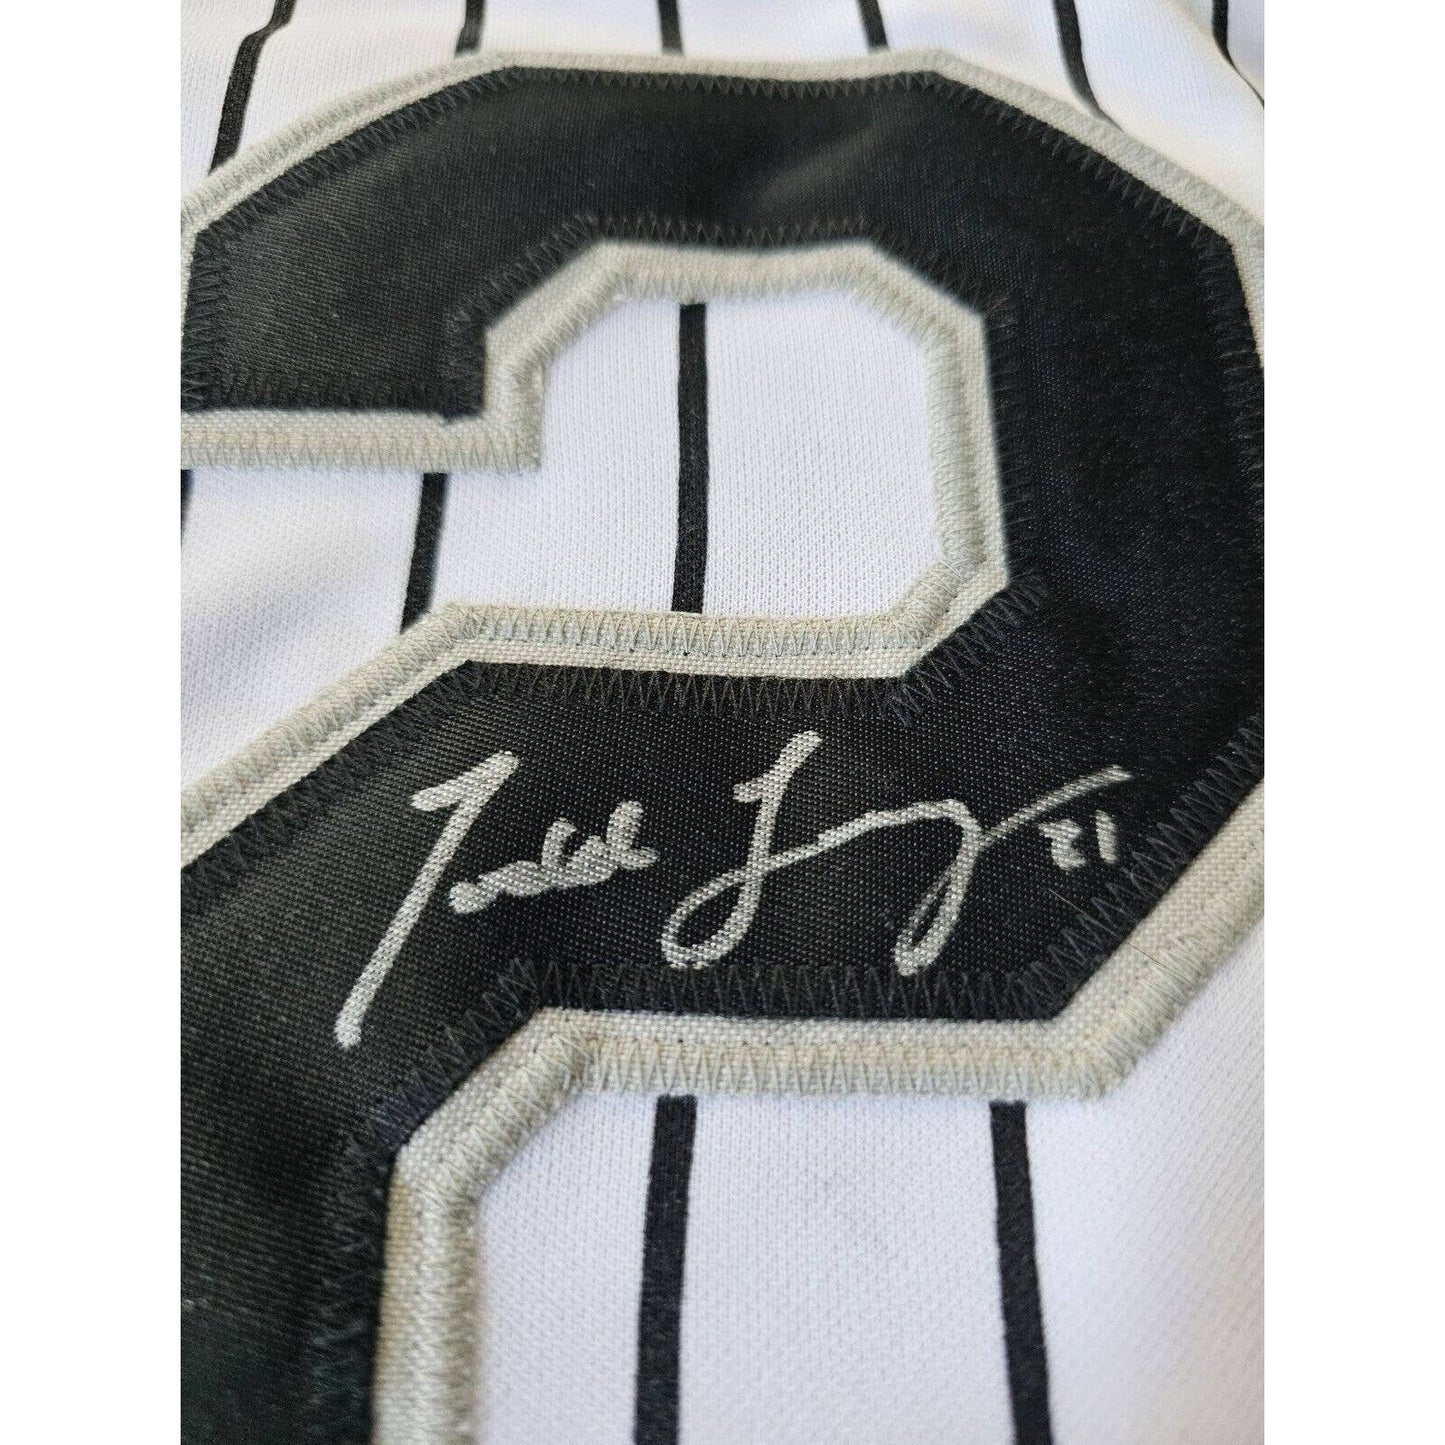 Todd Frazier Autographed/Signed Jersey Beckett COA Chicago White Sox